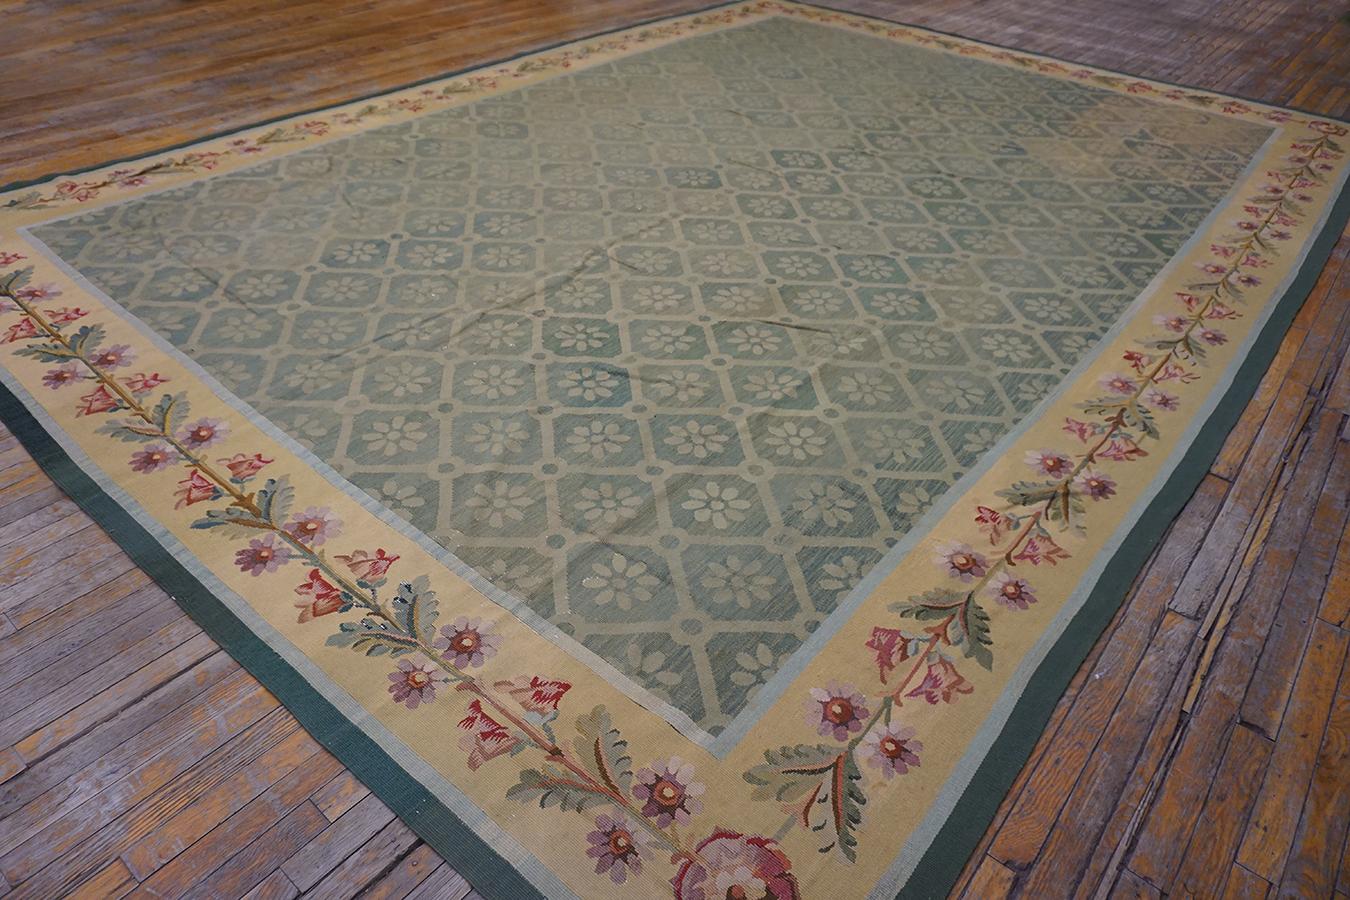 Hand-Woven 1920s French Aubusson Carpet in Empire Style ( 11'2